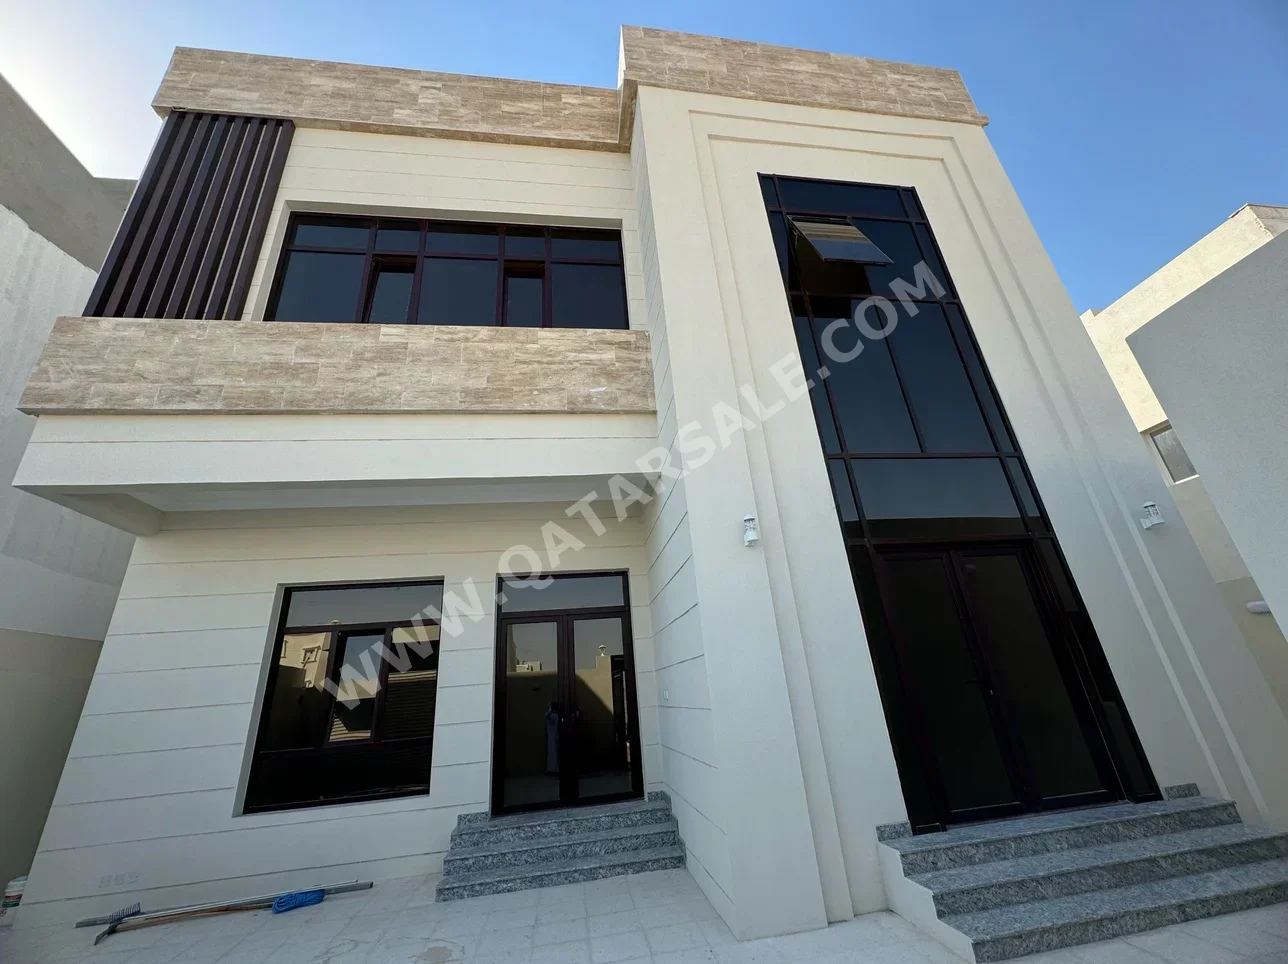 Family Residential  - Not Furnished  - Al Rayyan  - Ain Khaled  - 7 Bedrooms  - Includes Water & Electricity